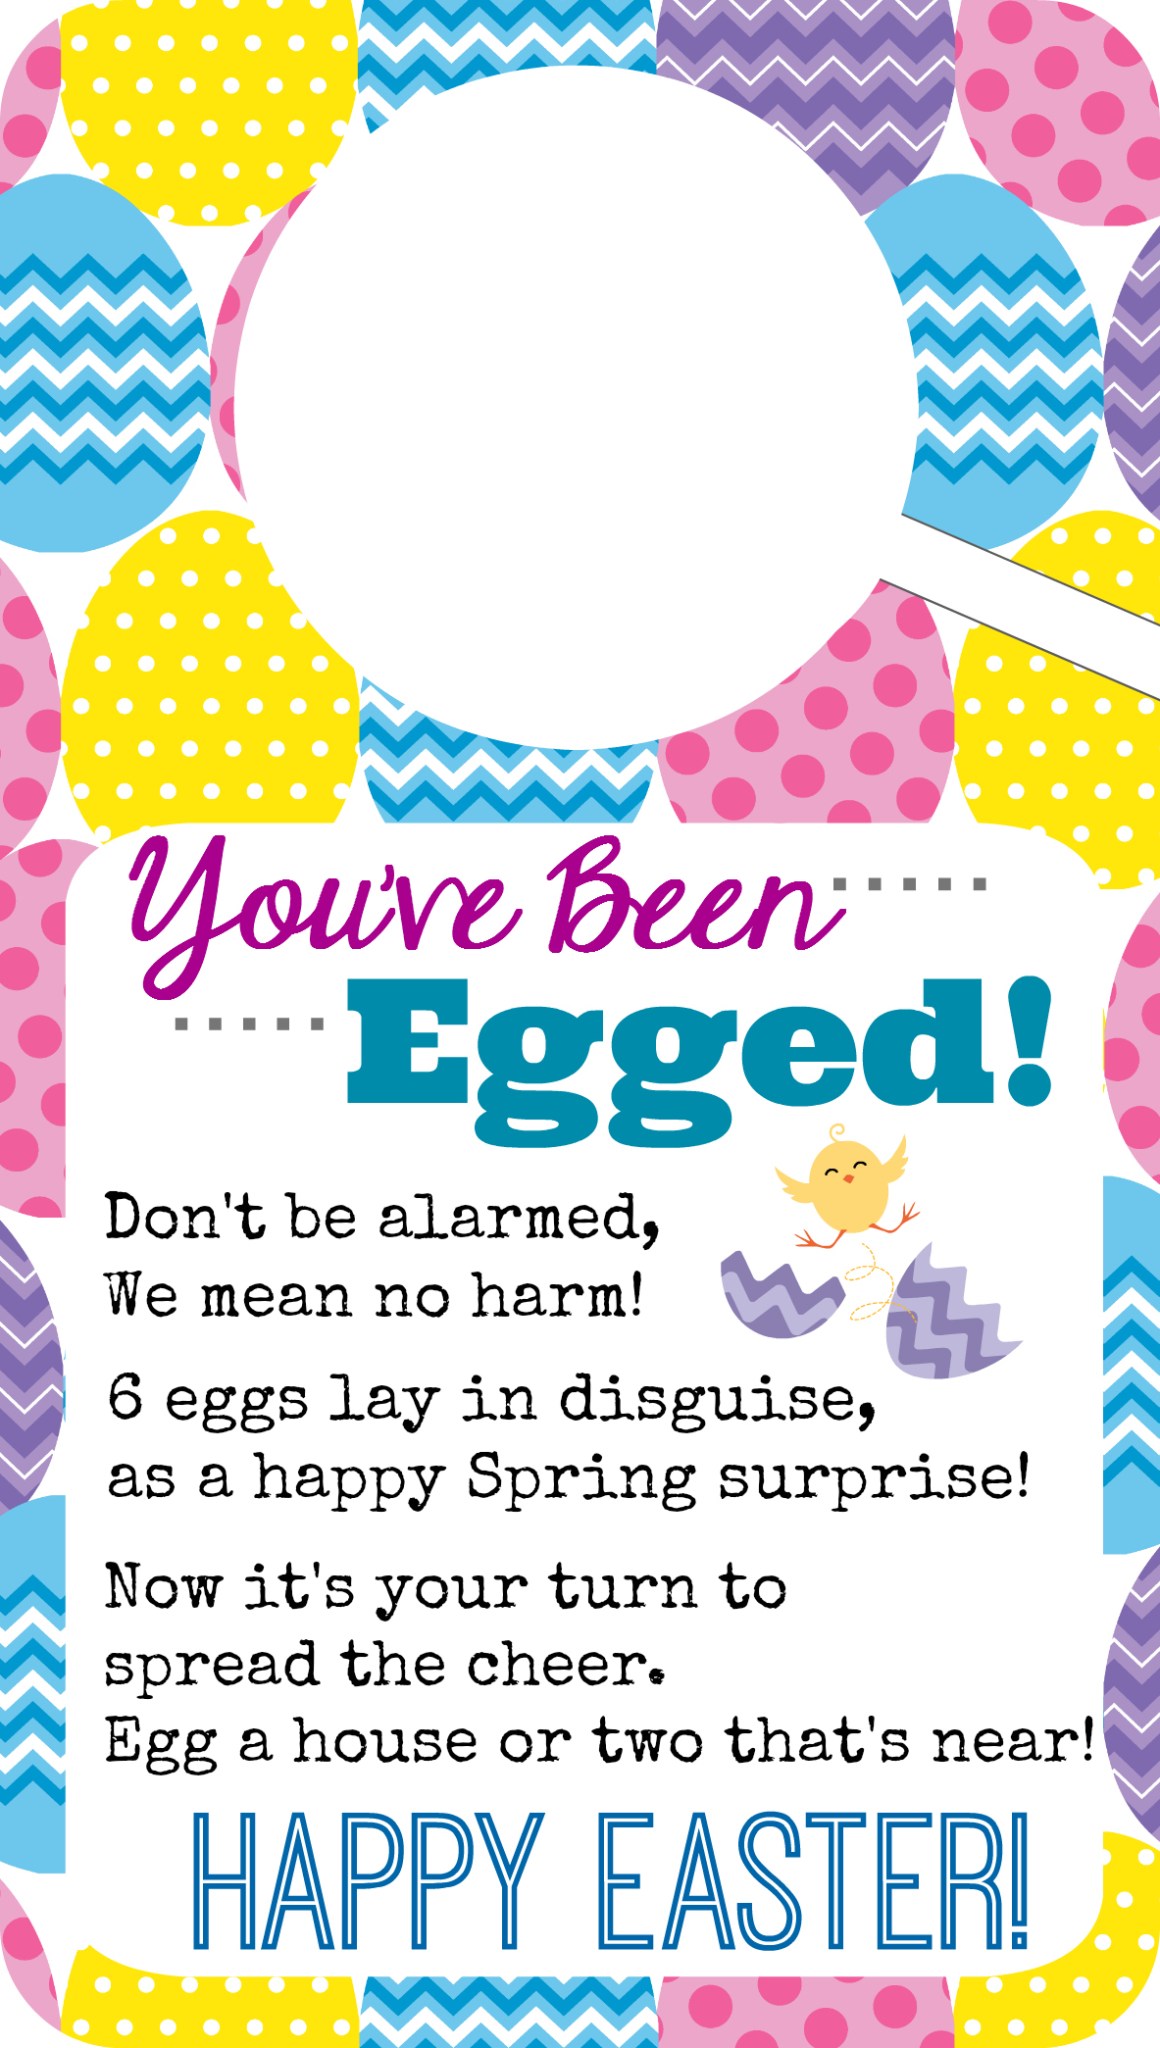 You've Been Egged (Free Printable Easter Idea)